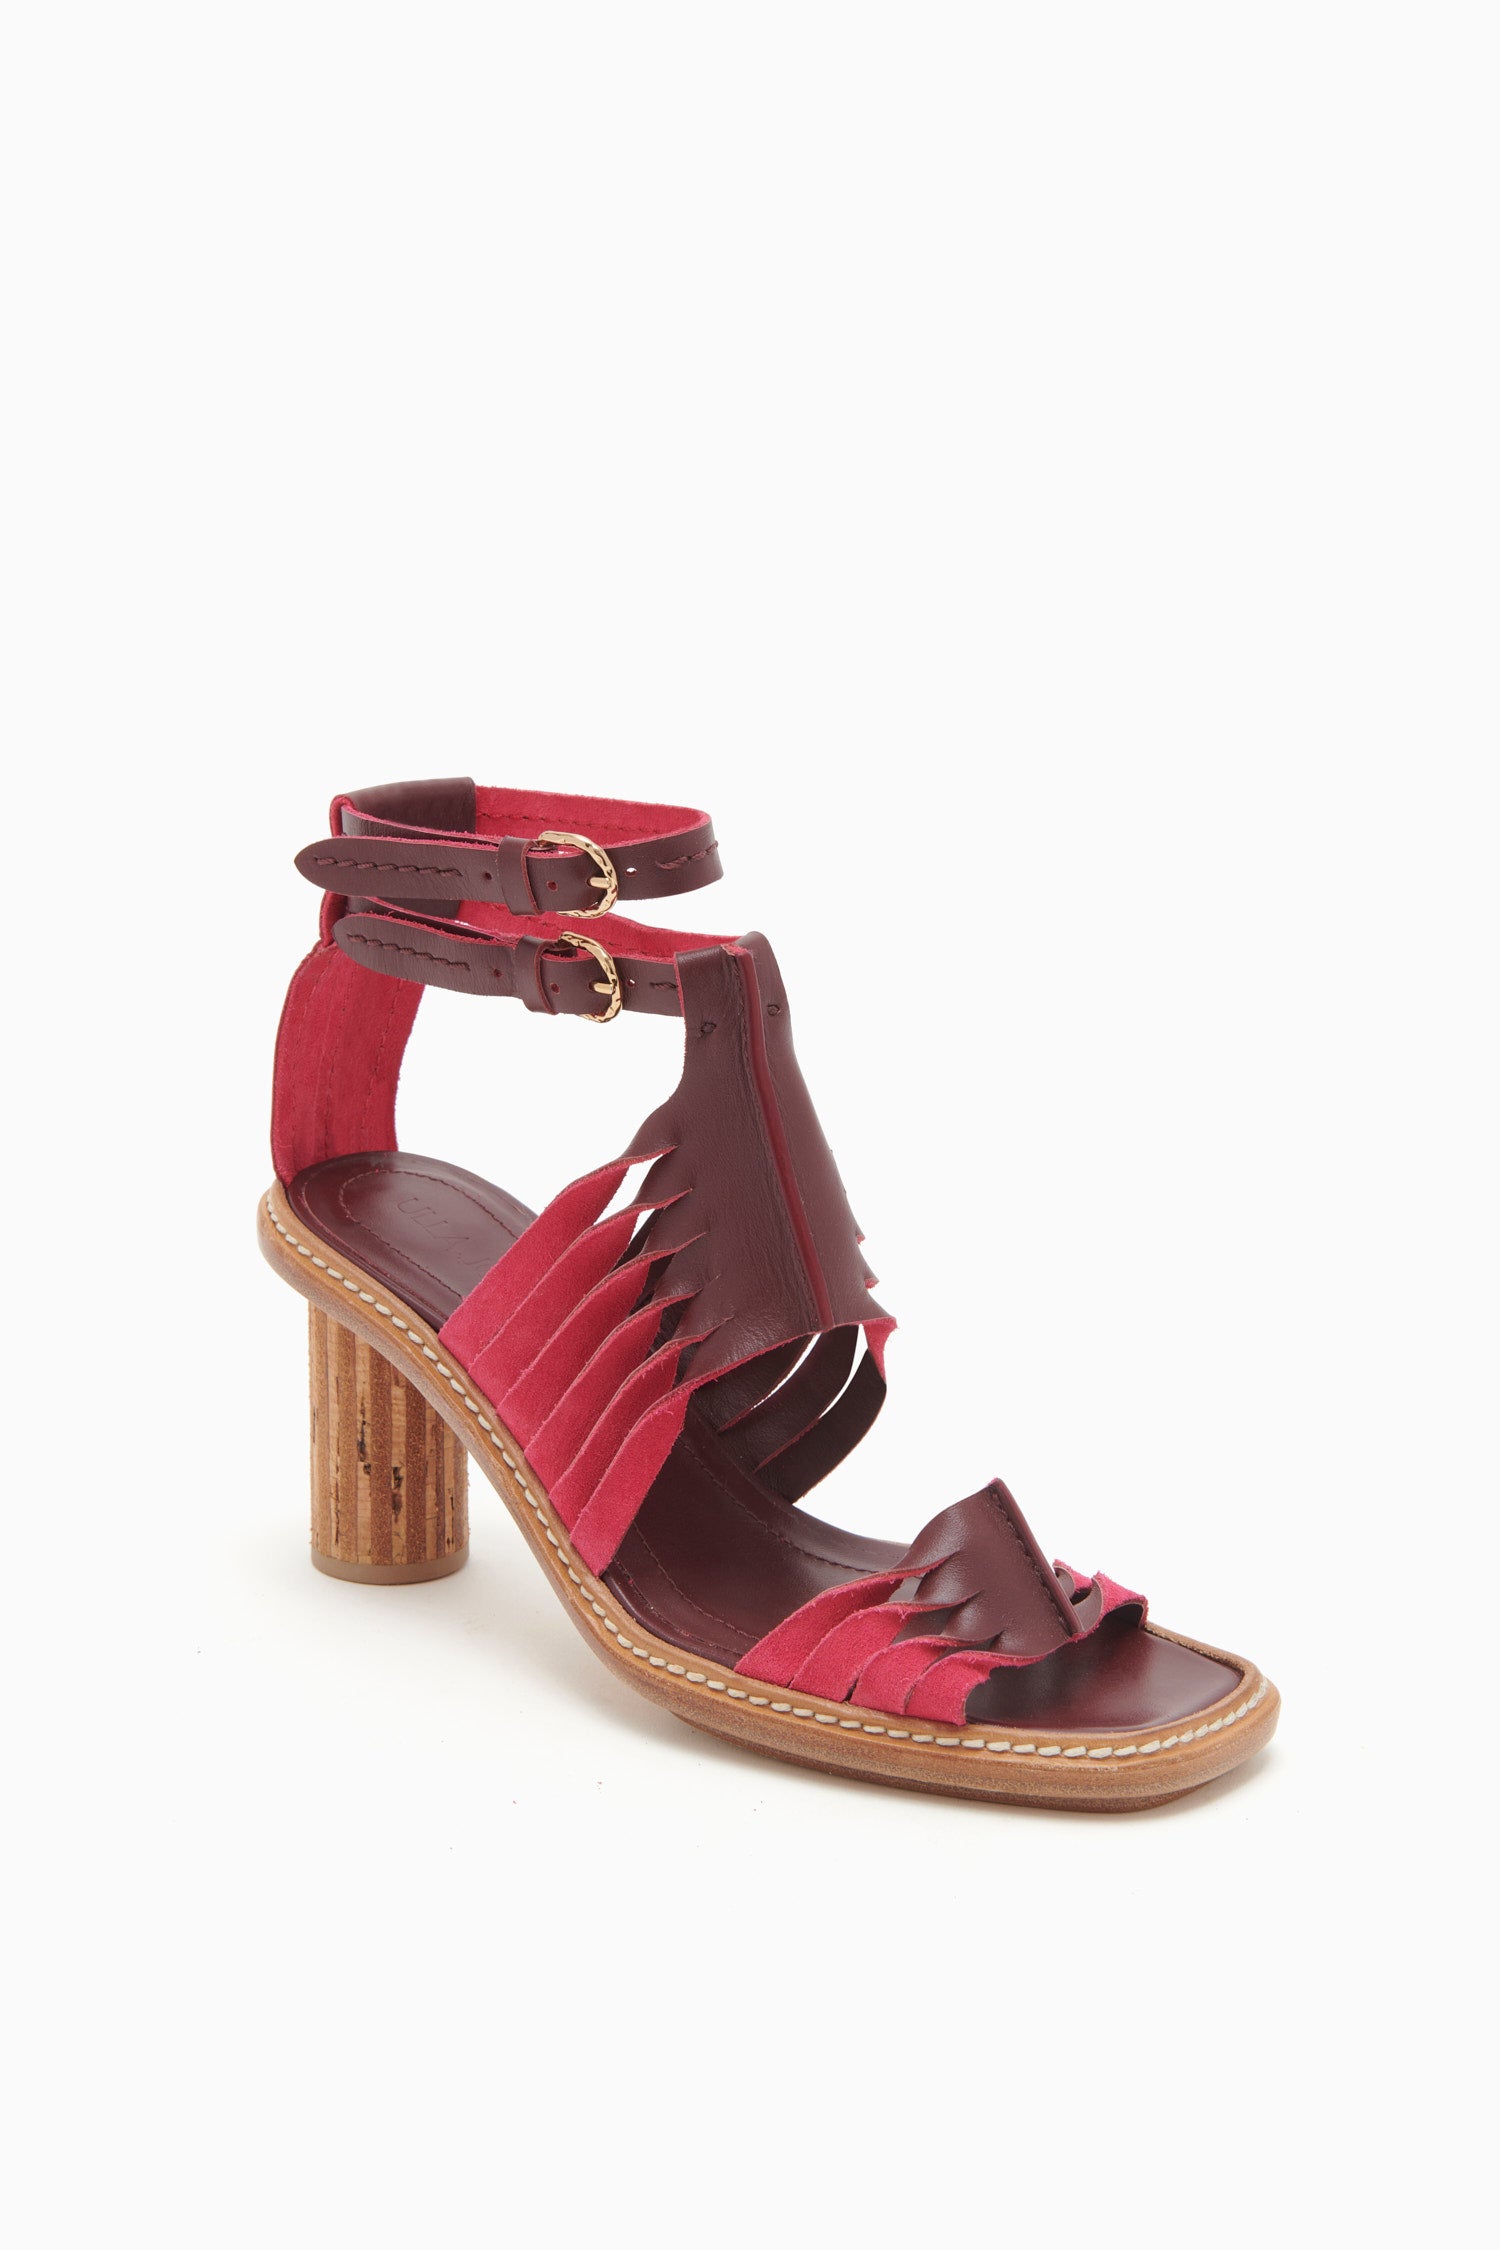 Ulla Johnson Madeira Twisted Contrast High Heel - Orchid Colorblock